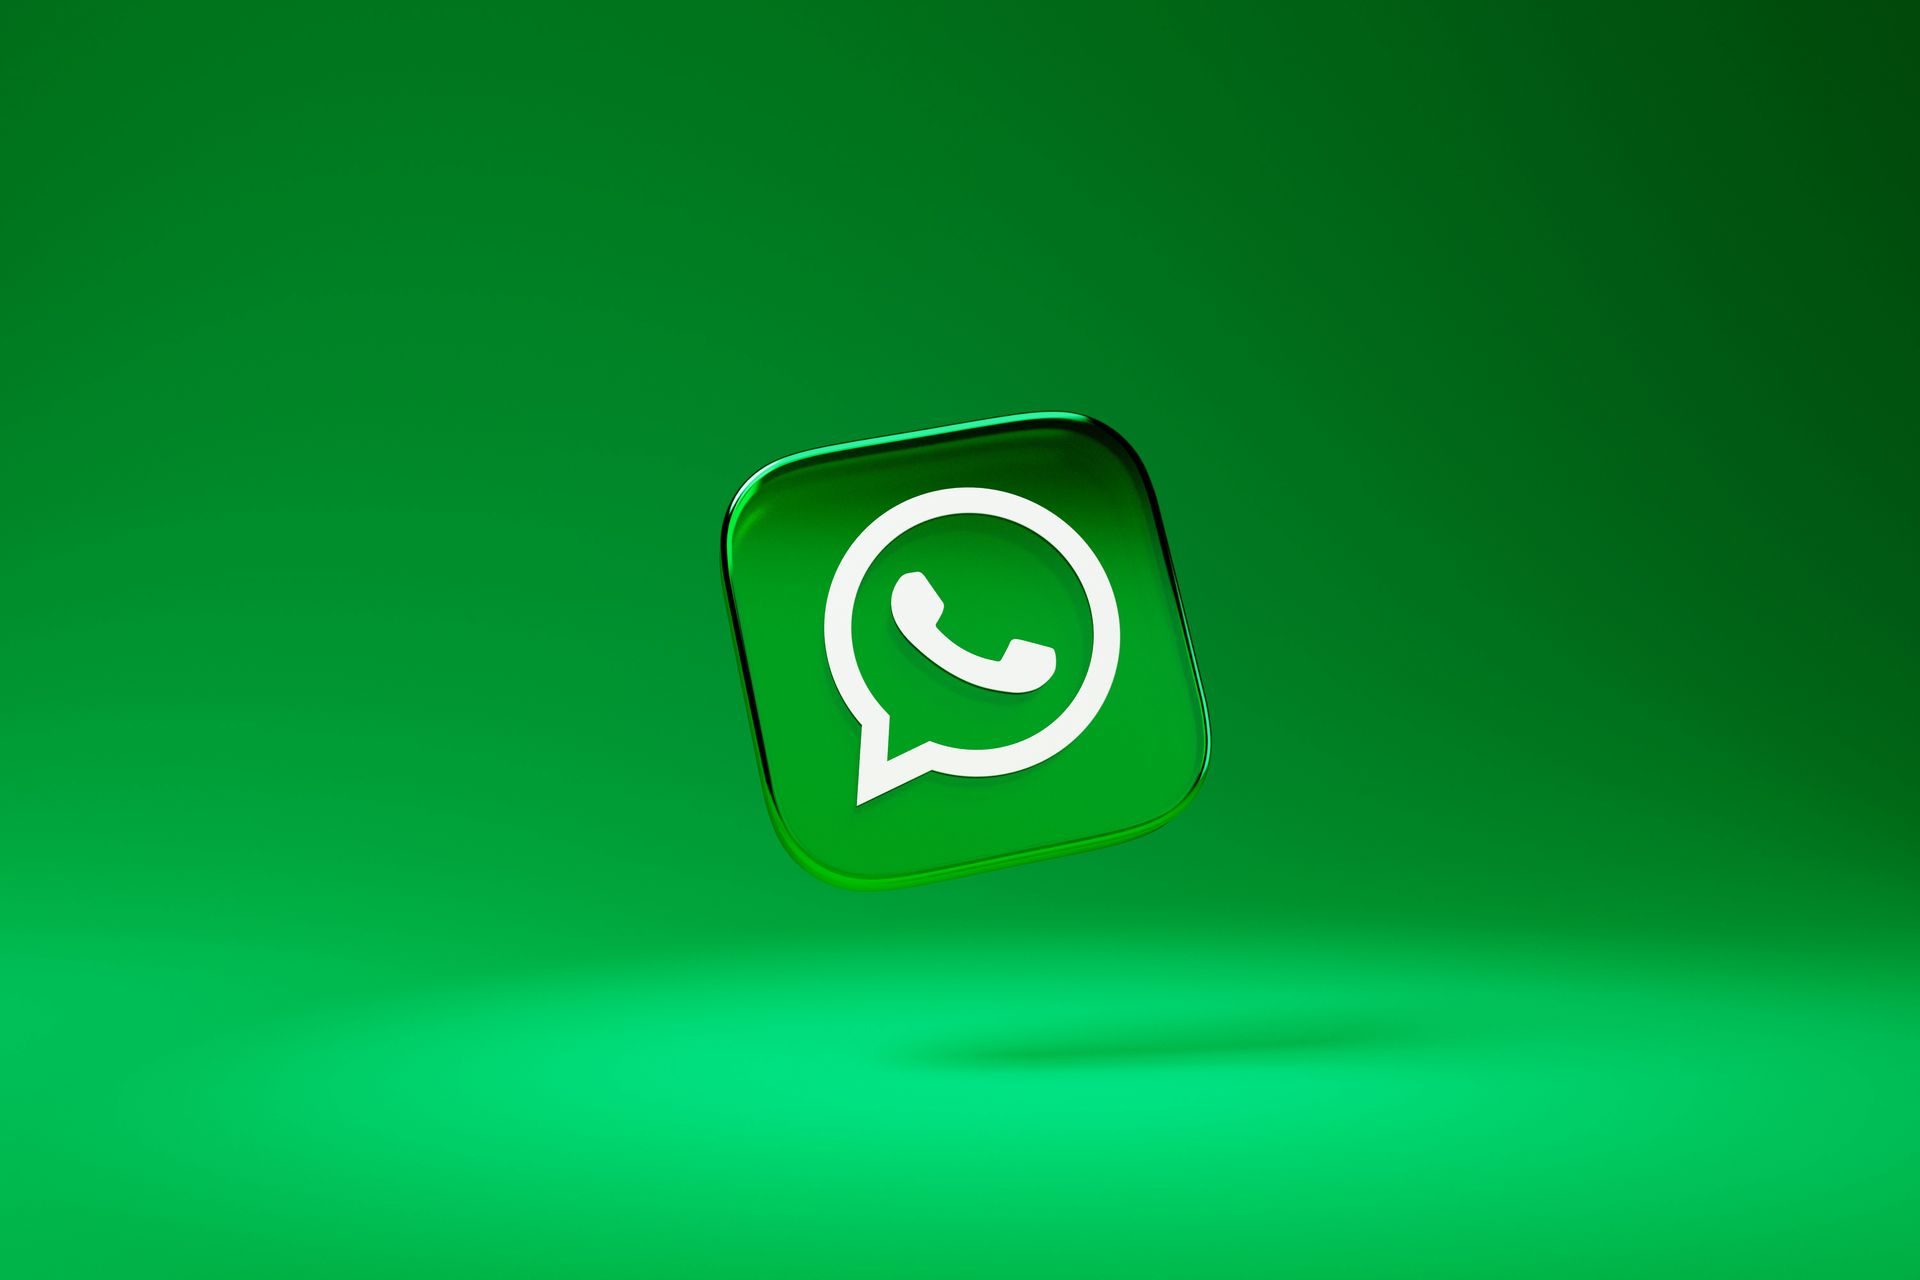 WhatsApp allows pinning multiple messages in chats